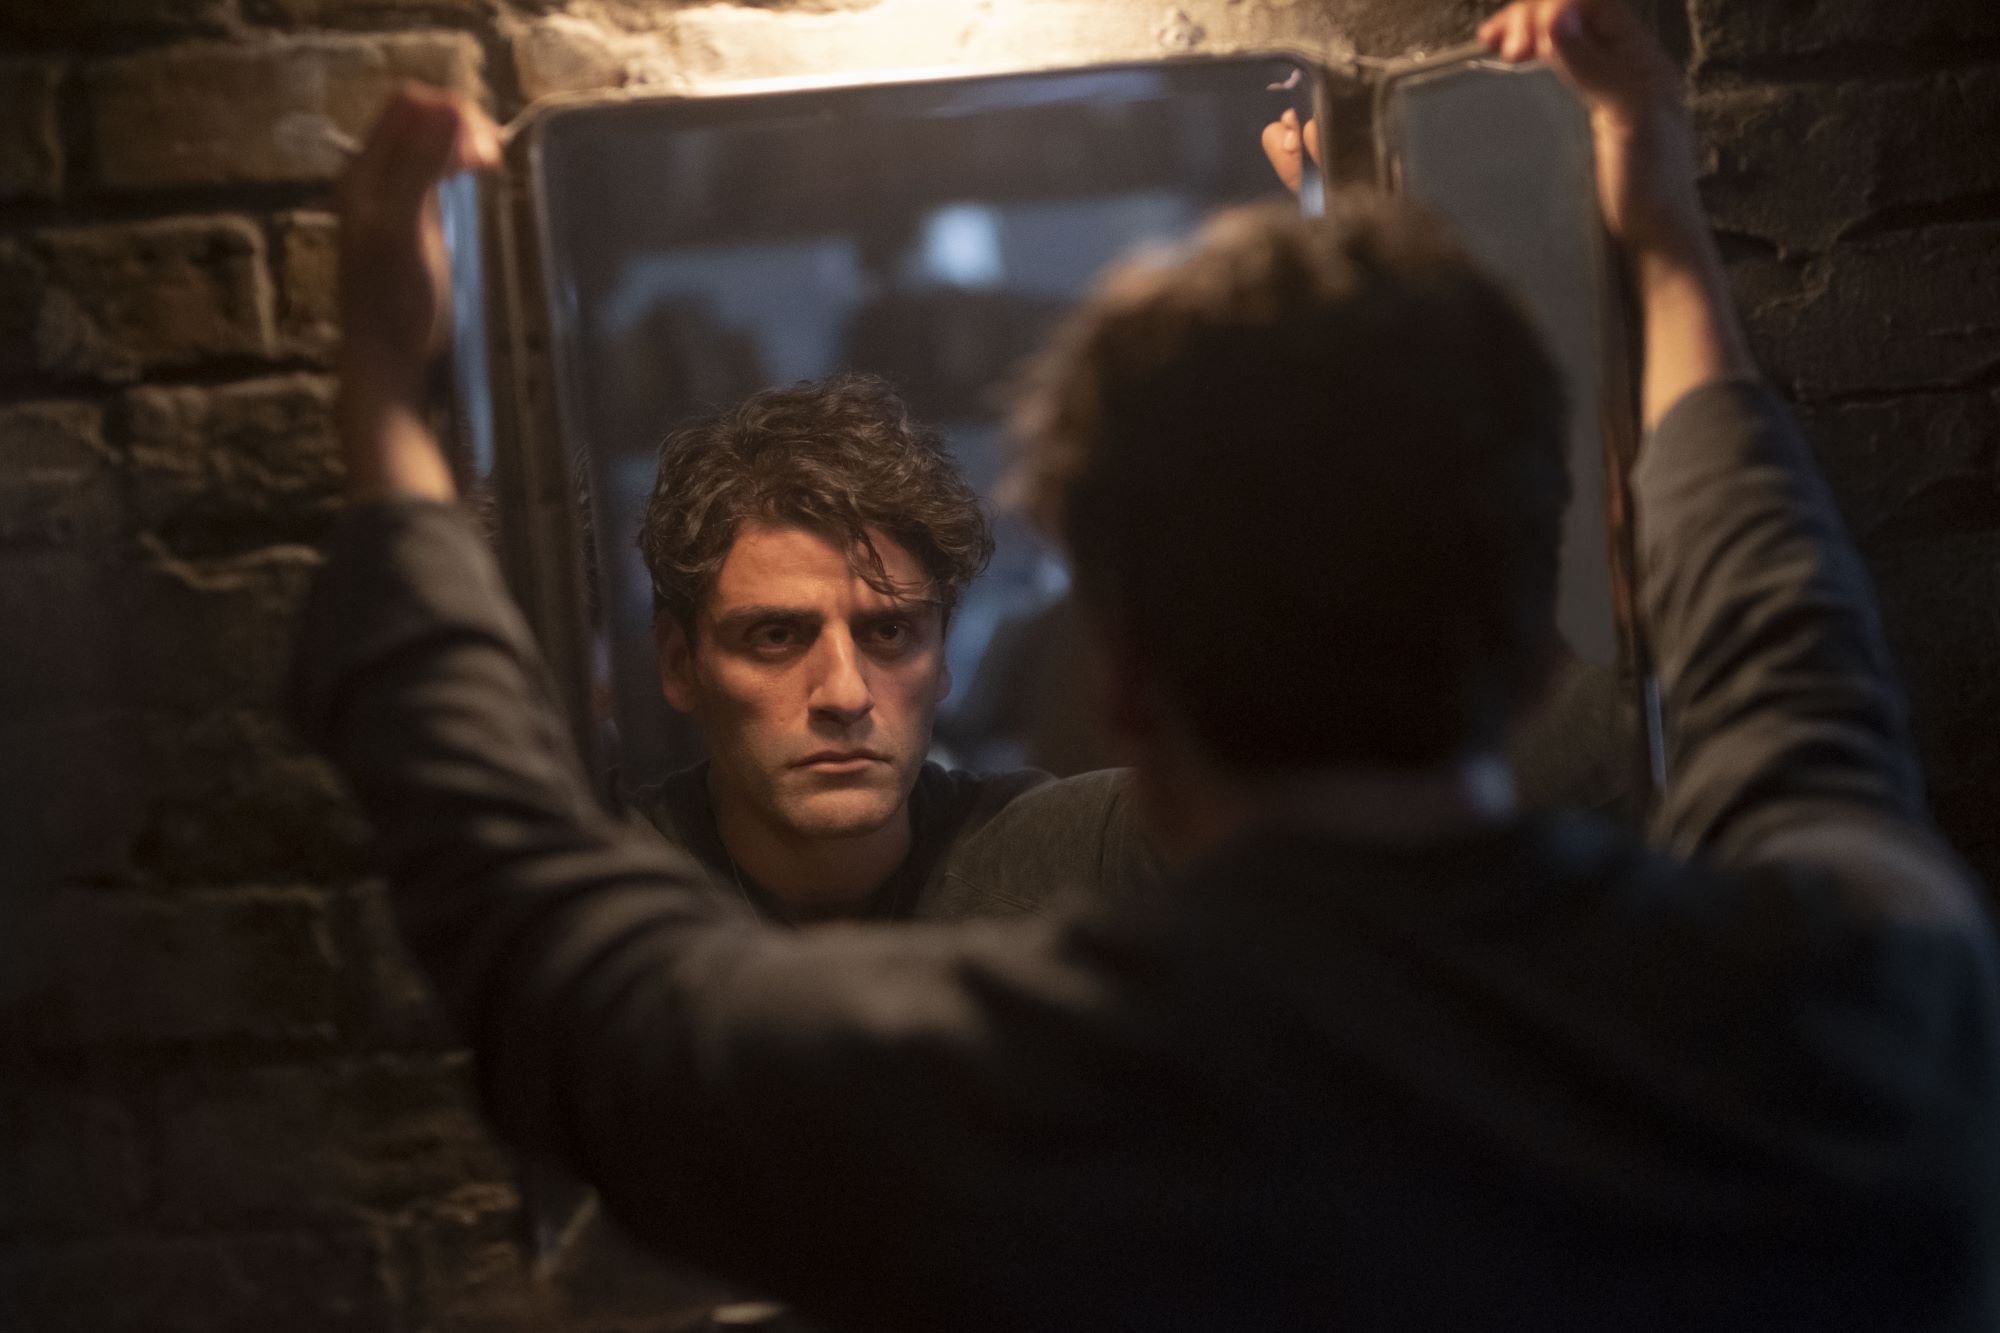 MCU's 'Moon Knight' star Oscar Isaac, in character as Steven Grant, stares at himself in the mirror. He wears a black long-sleeved shirt.